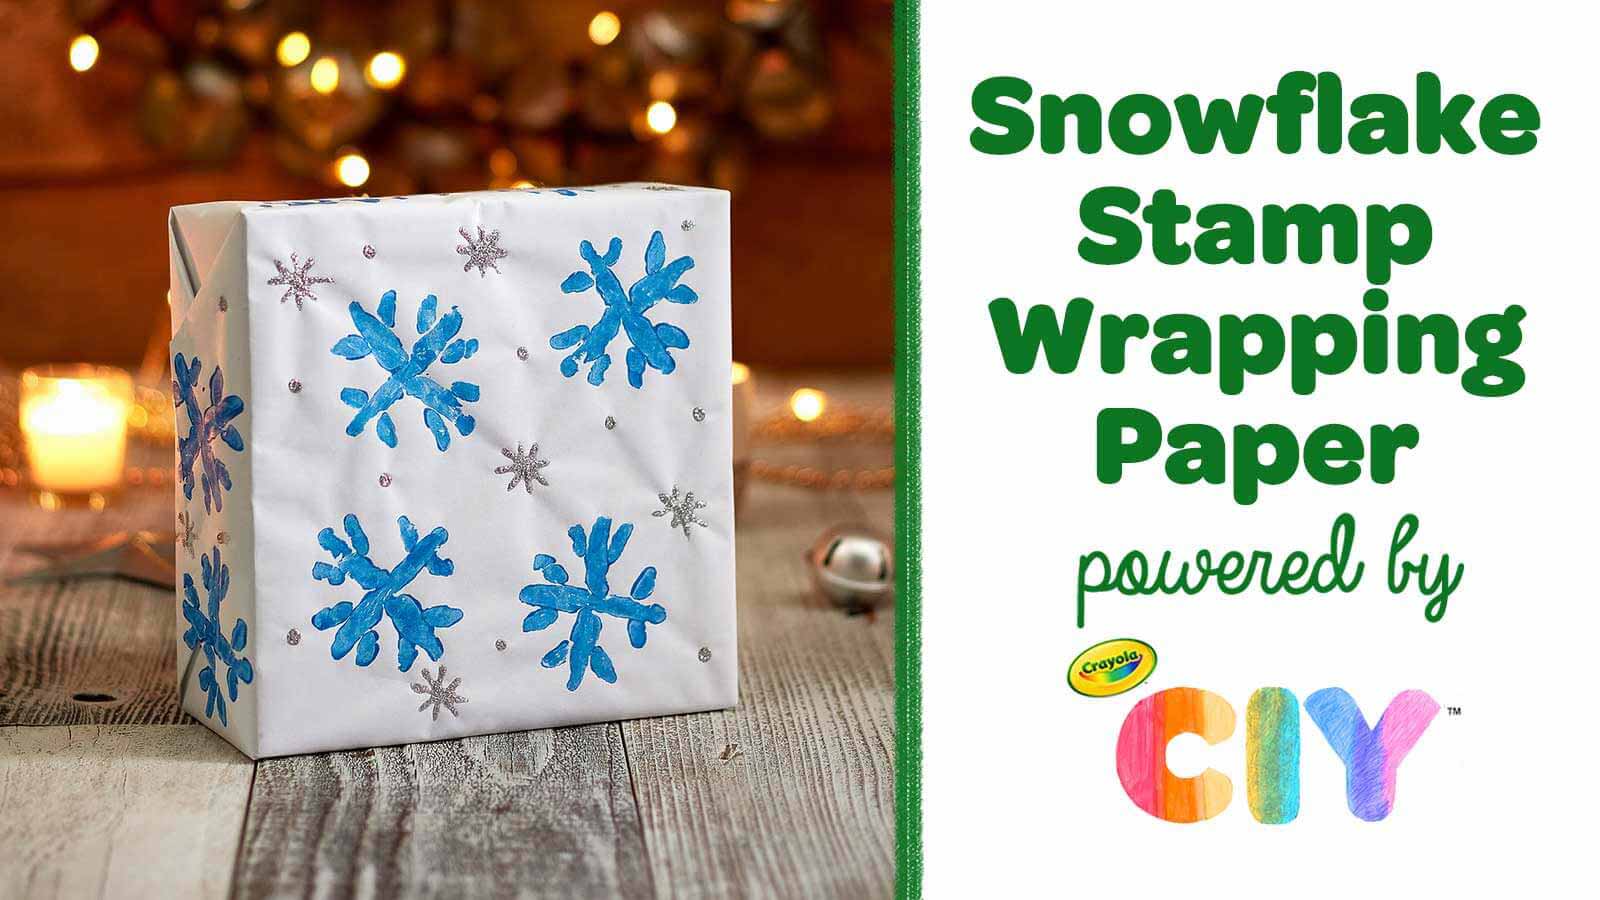 Snowflake-Stamp-Wrapping-Paper_Poster-Frame